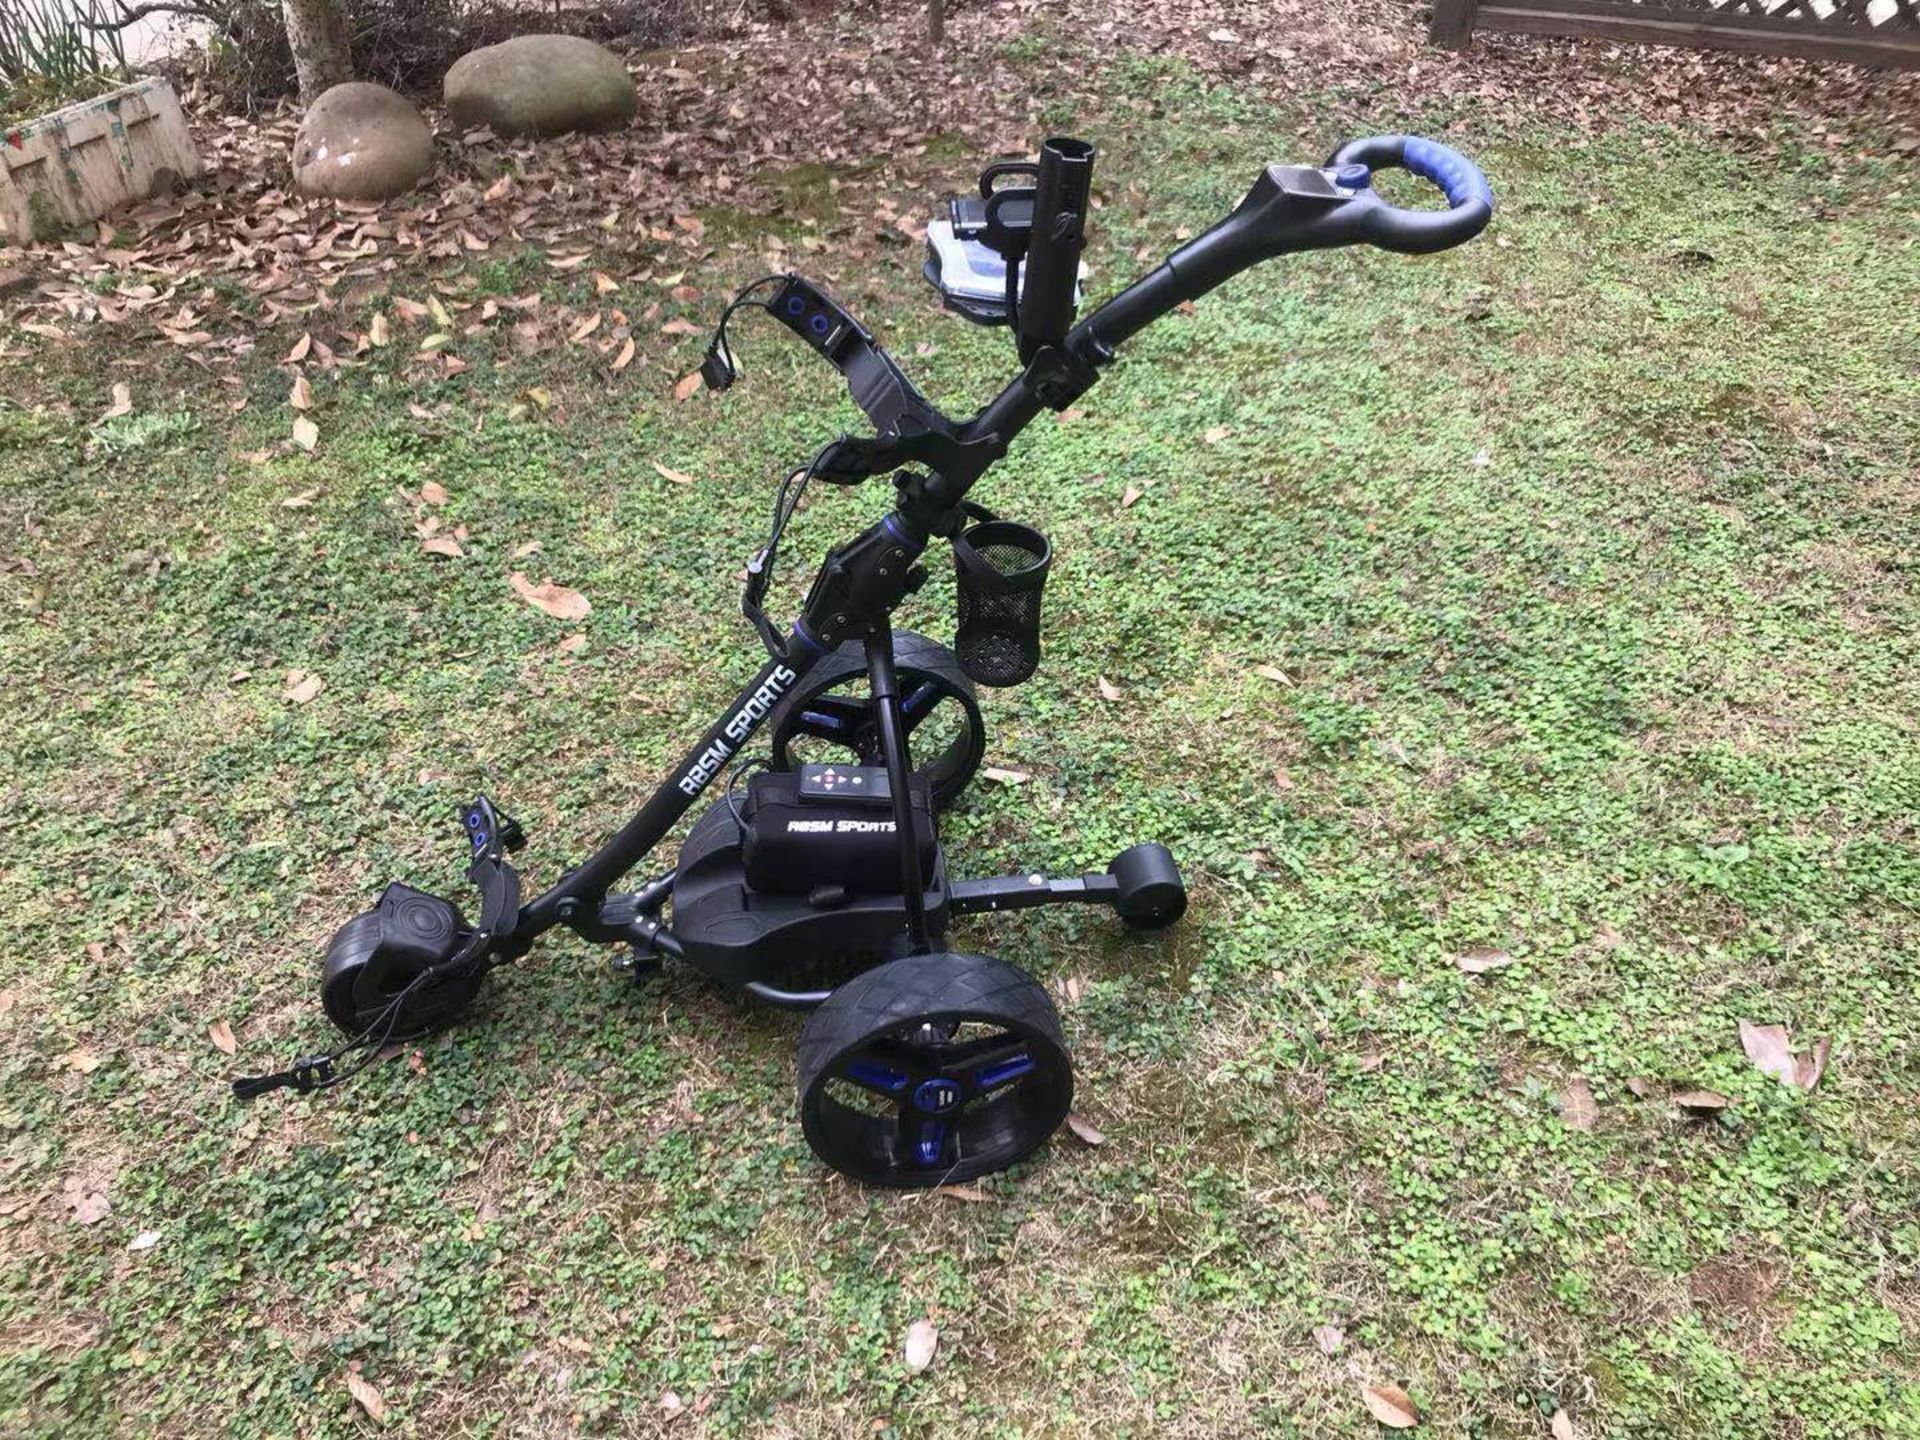 RBSM SPORTS G93R E-GOLF TROLLEY W/ REMOTE CONTROL (RENTAL UNIT) (TESTED - WORKING) (NEW COST $1,500) - Image 3 of 8